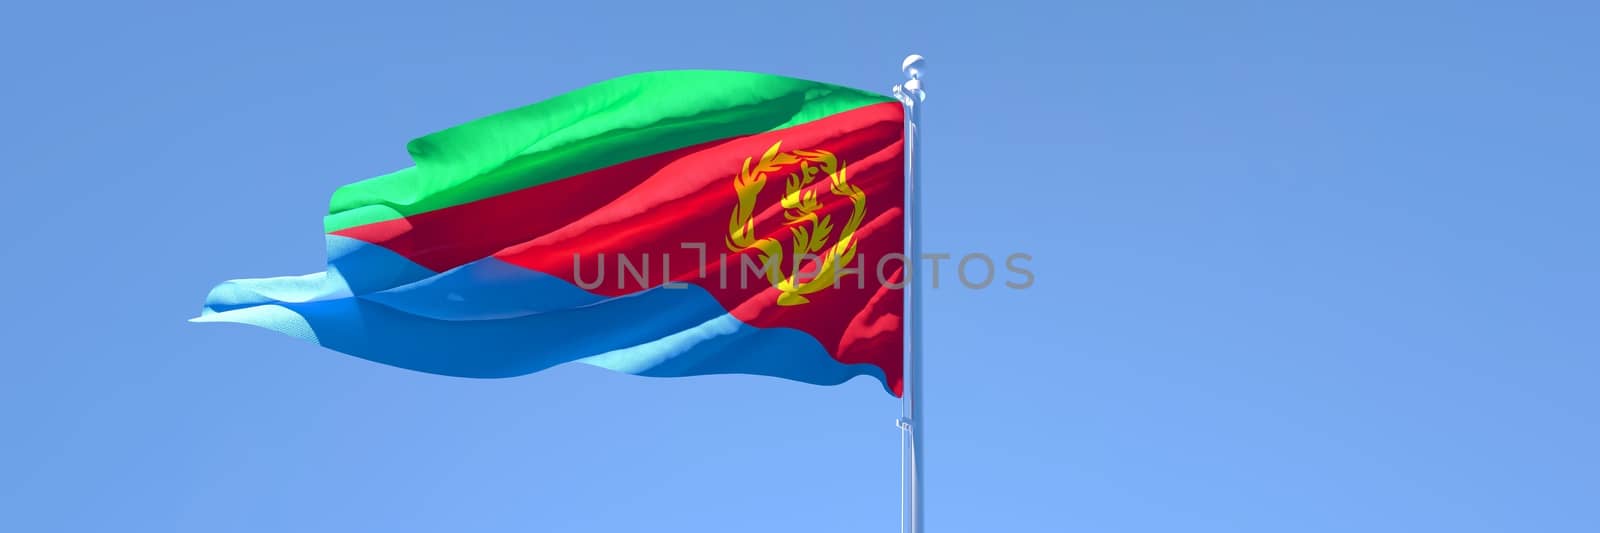 3D rendering of the national flag of Eritrea waving in the wind against a blue sky